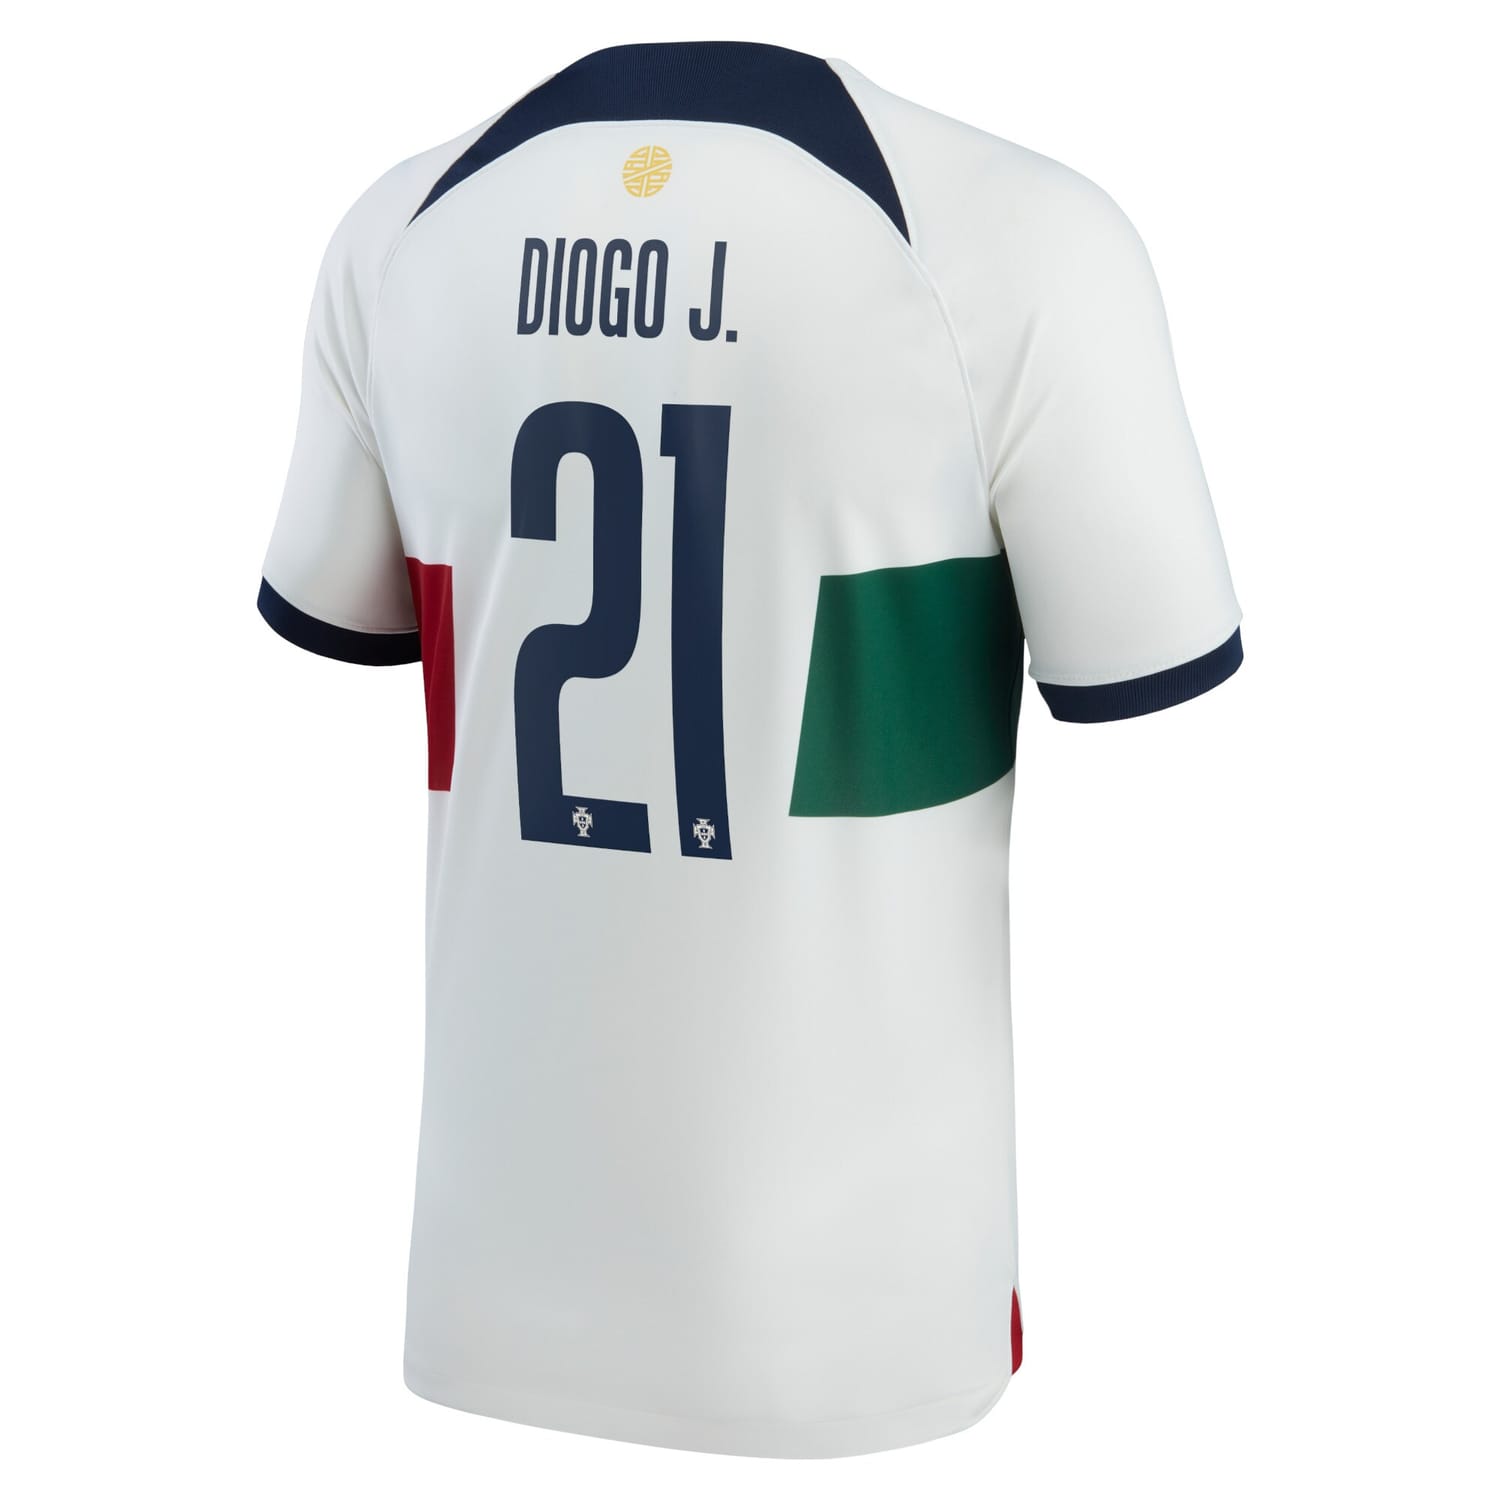 Portugal National Team Away Jersey Shirt White 2022-23 player Diogo Jota printing for Men